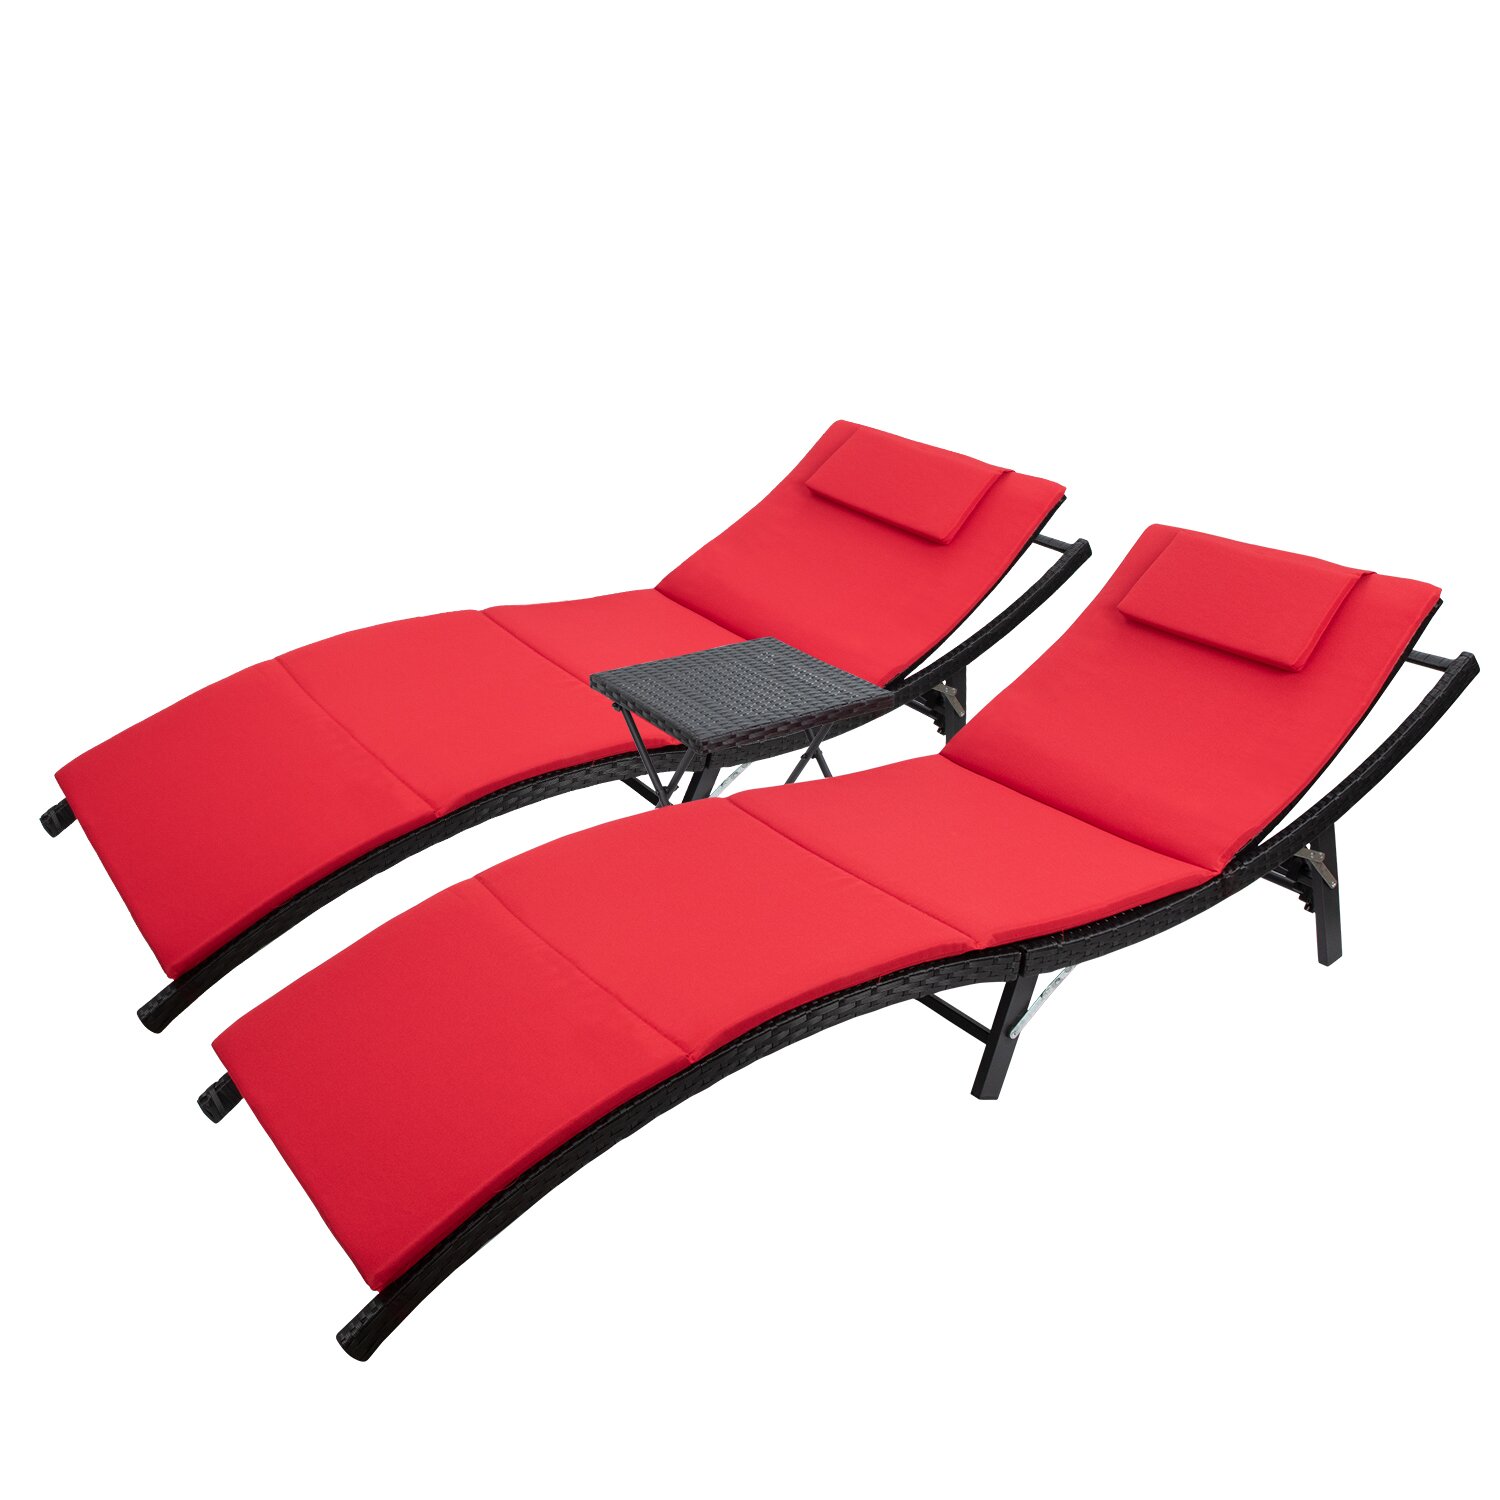 Homall 3 Pieces Patio Chaise Lounge Chair Sets Outdoor Beach Pool PE Rattan Reclining Chair with Folding Table and Cushion, Red - image 2 of 8